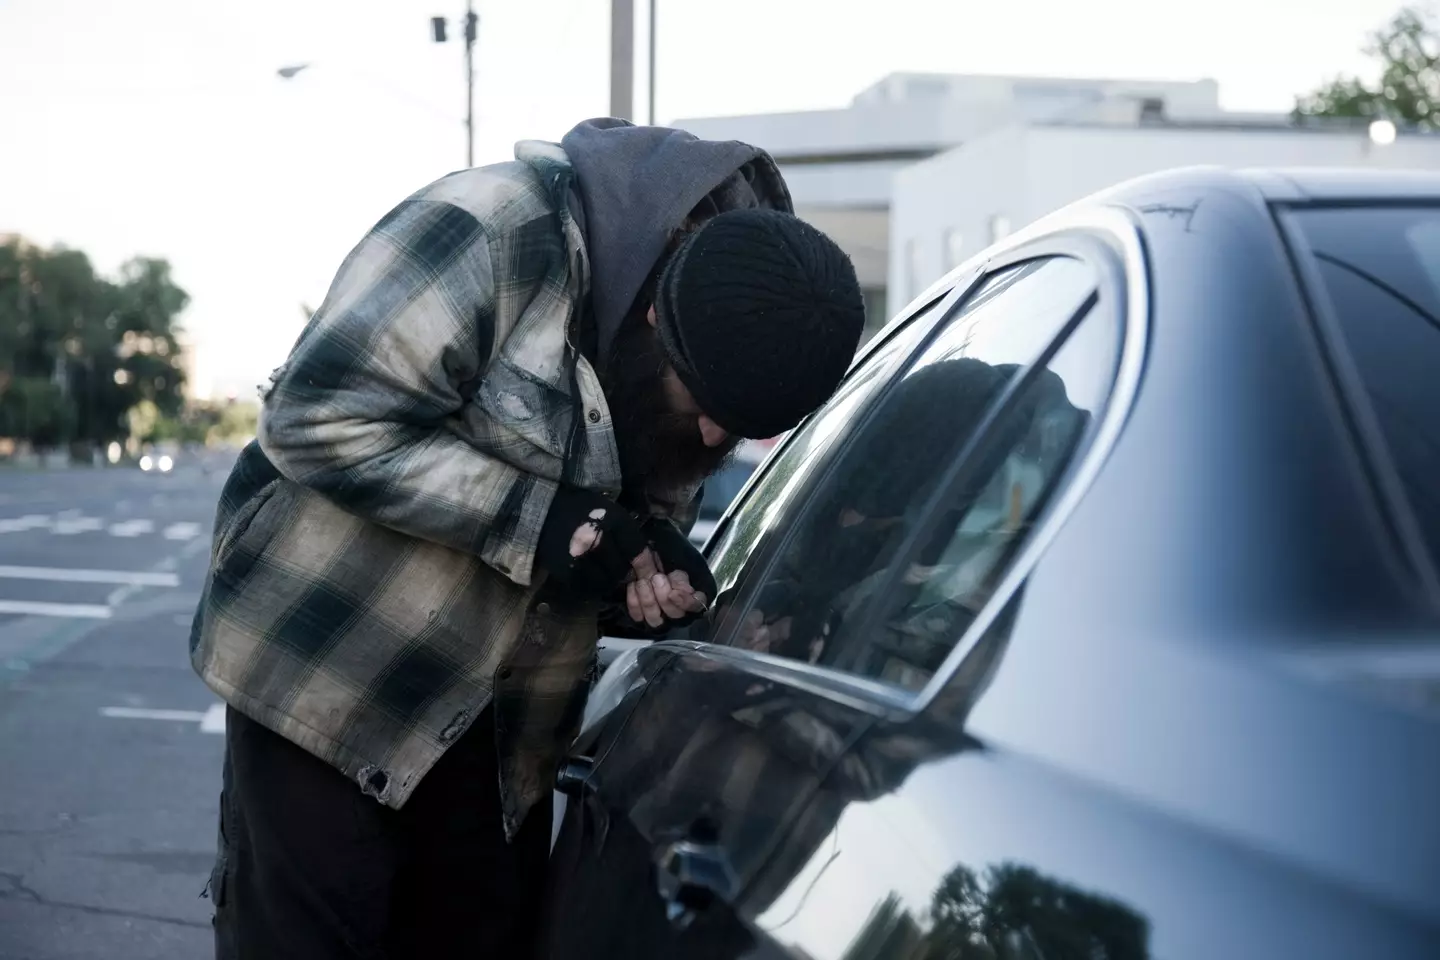 There are a lot of factors involved in why a thief targets a car.